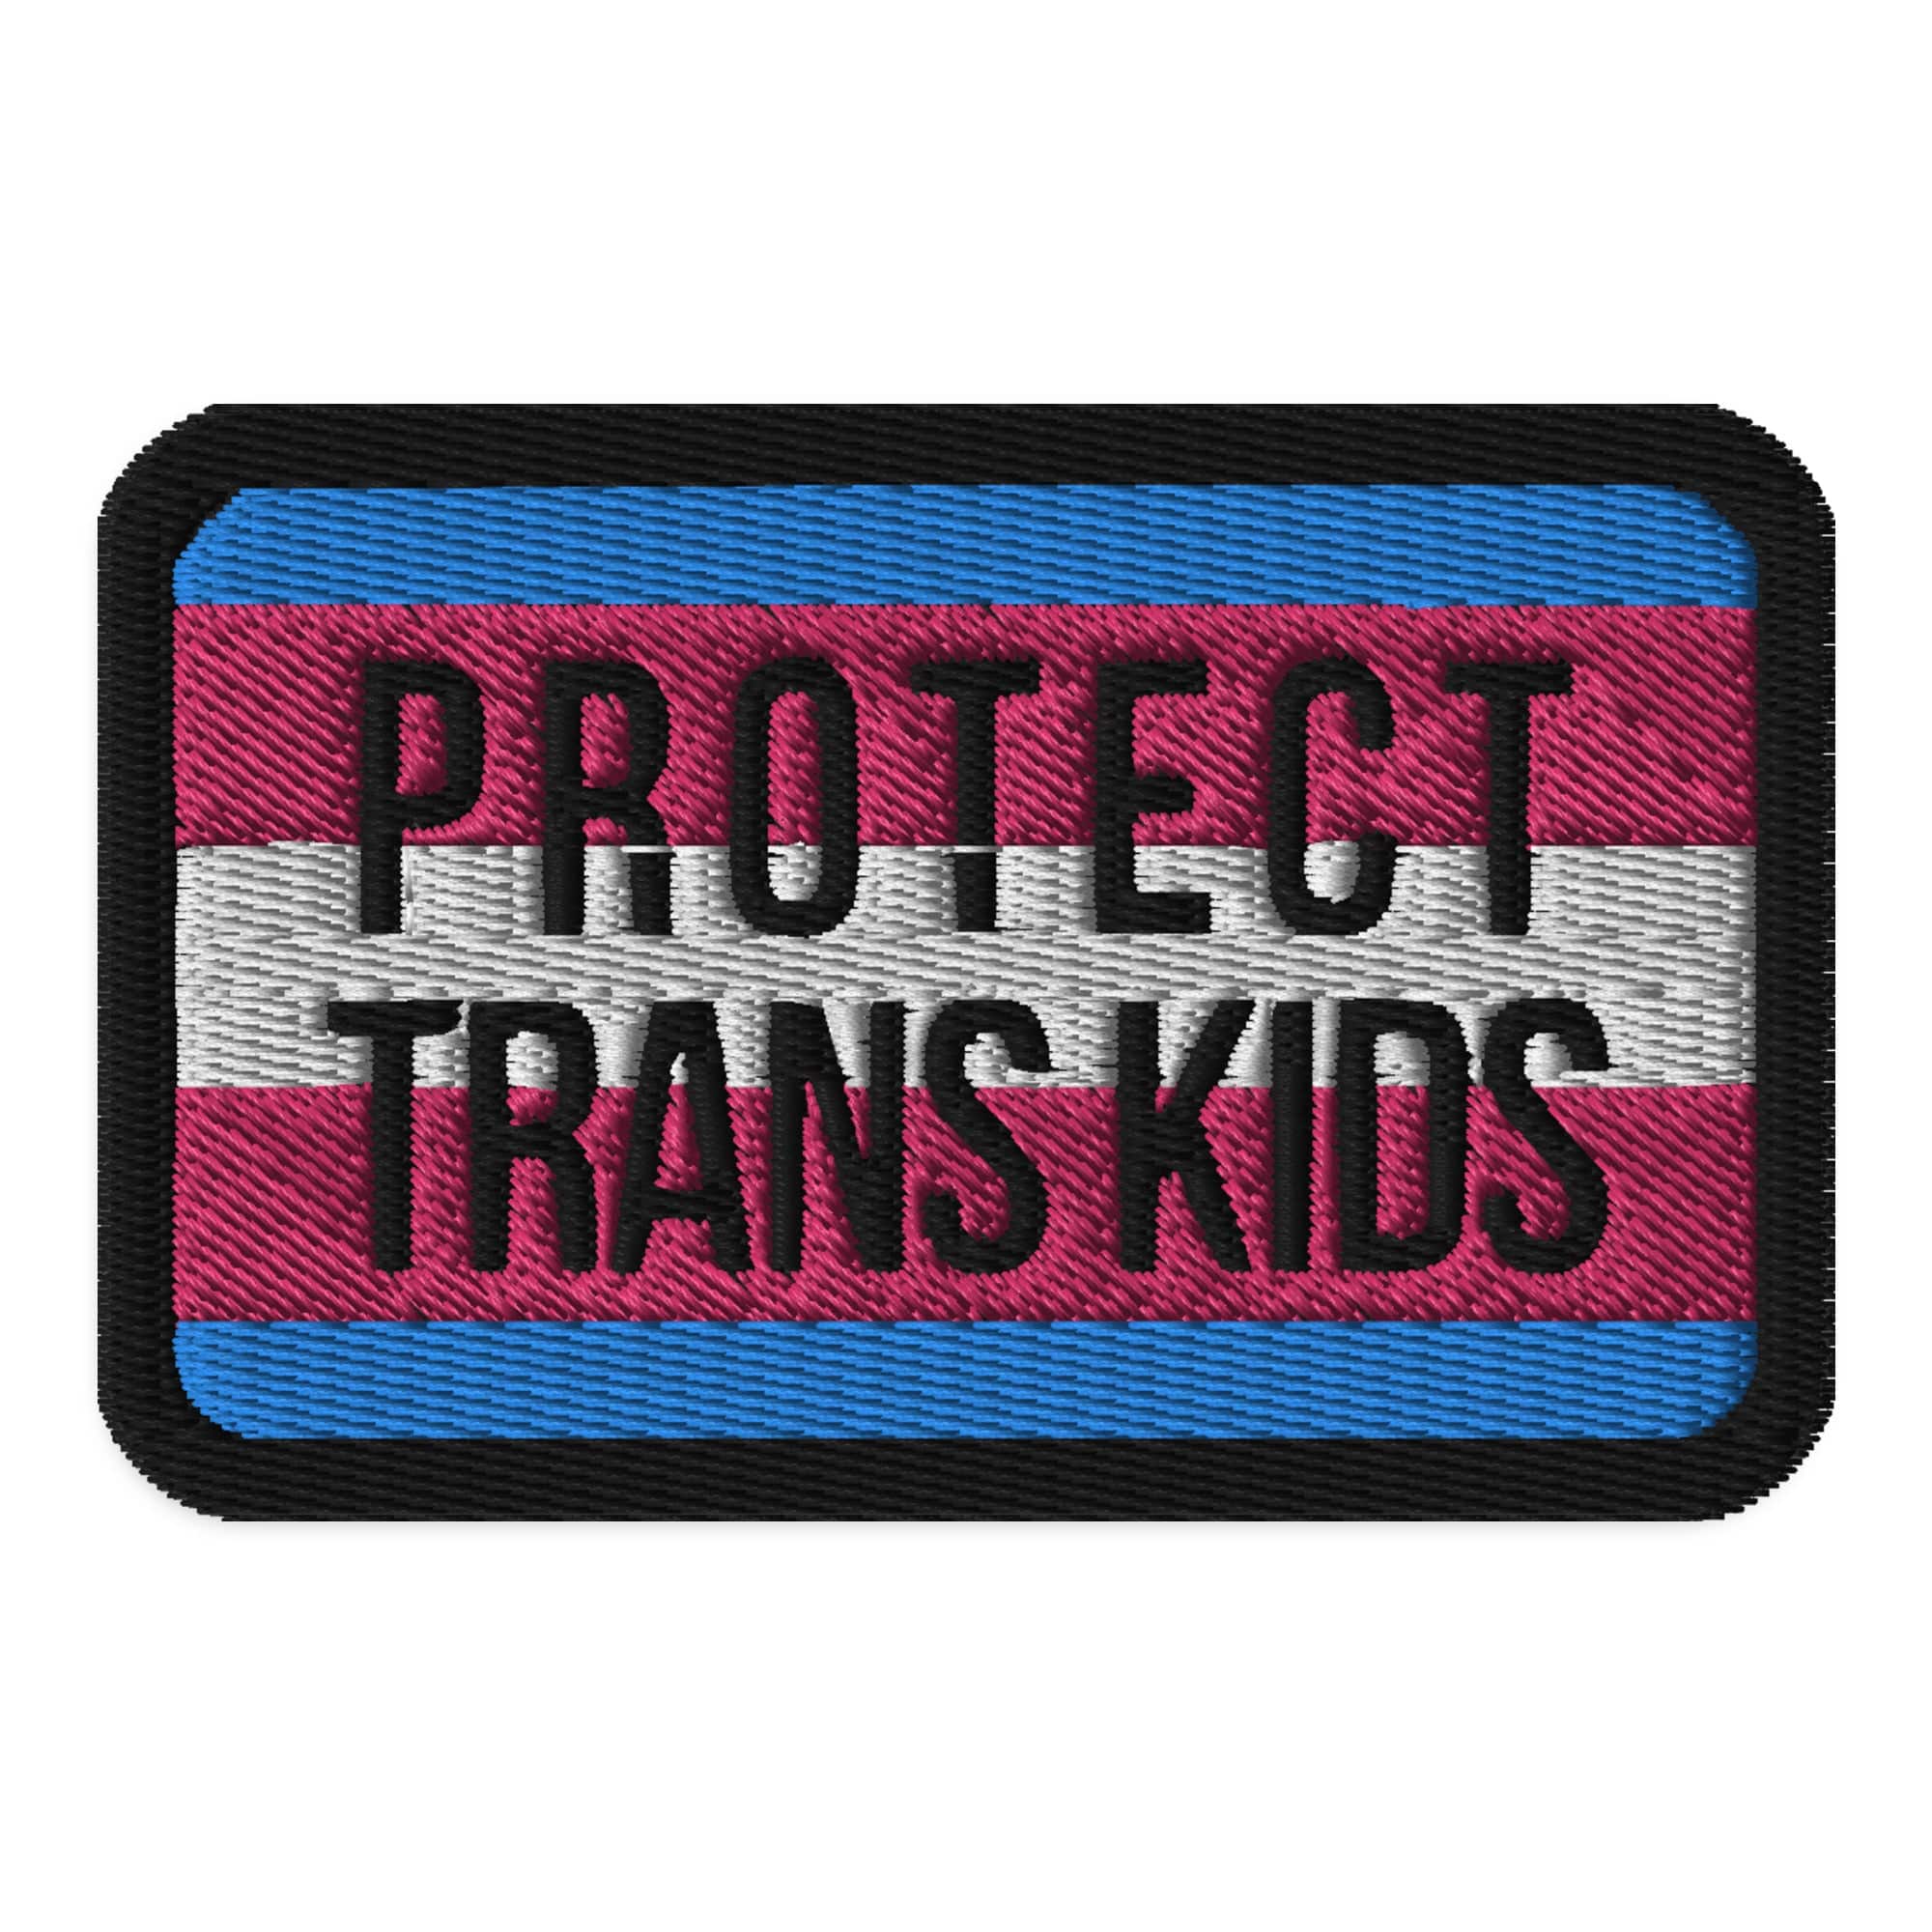 Protect Trans Kids Embroidered patch